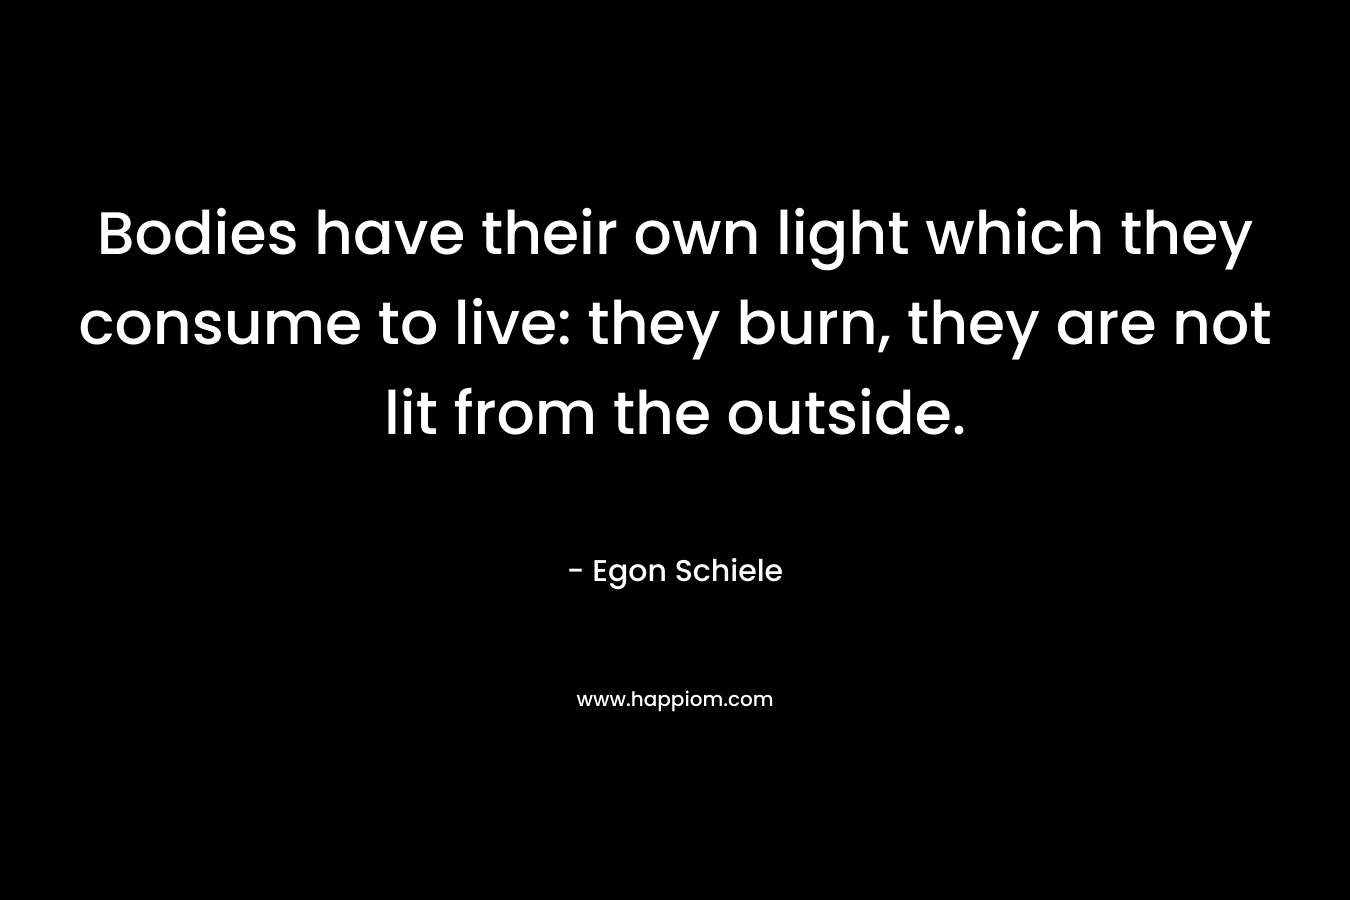 Bodies have their own light which they consume to live: they burn, they are not lit from the outside.